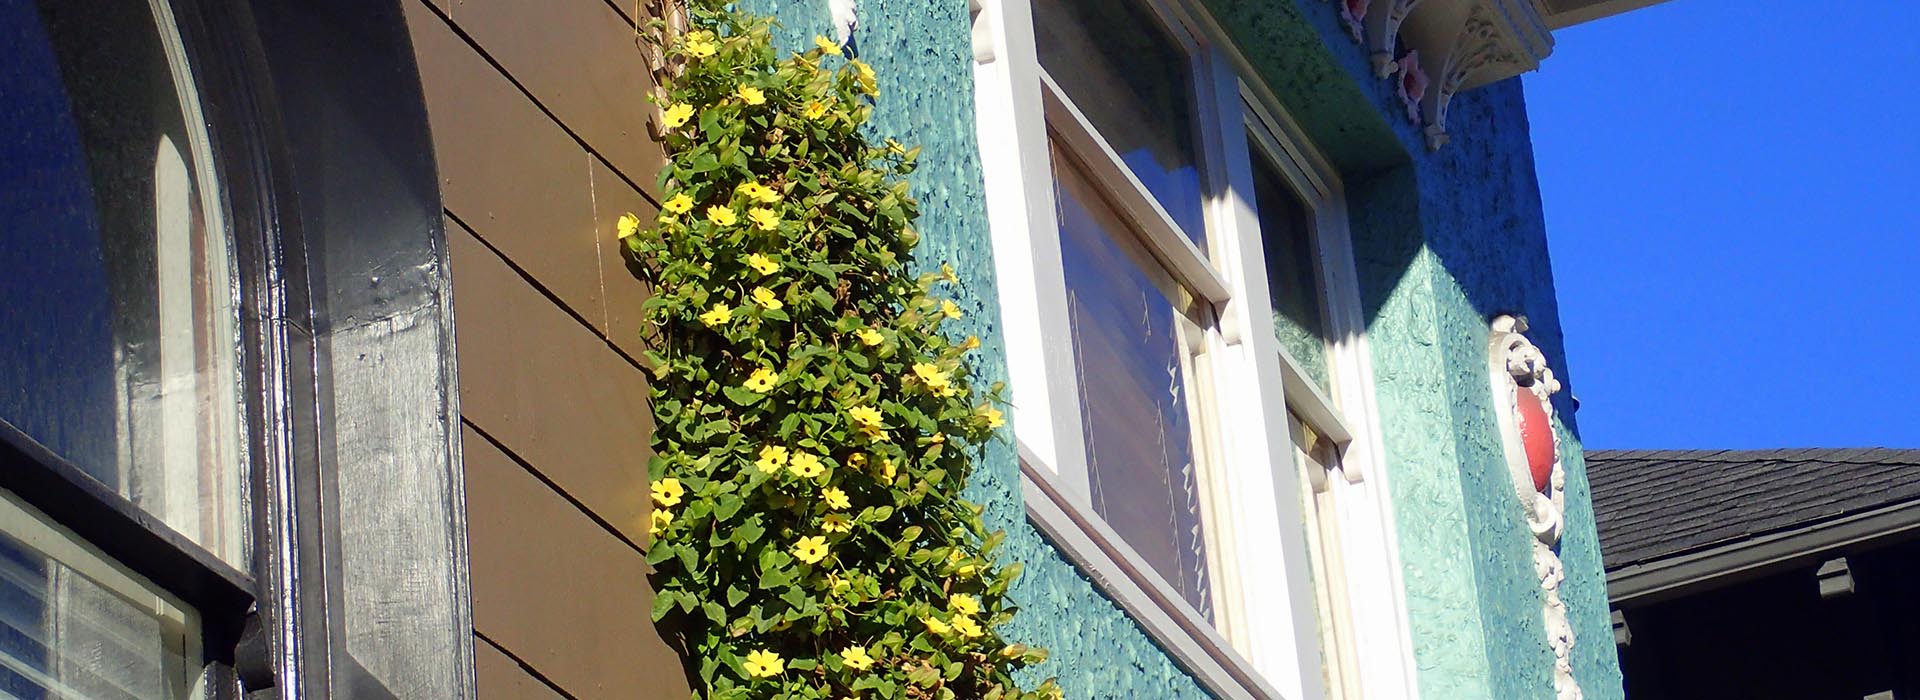 house yellow flowers